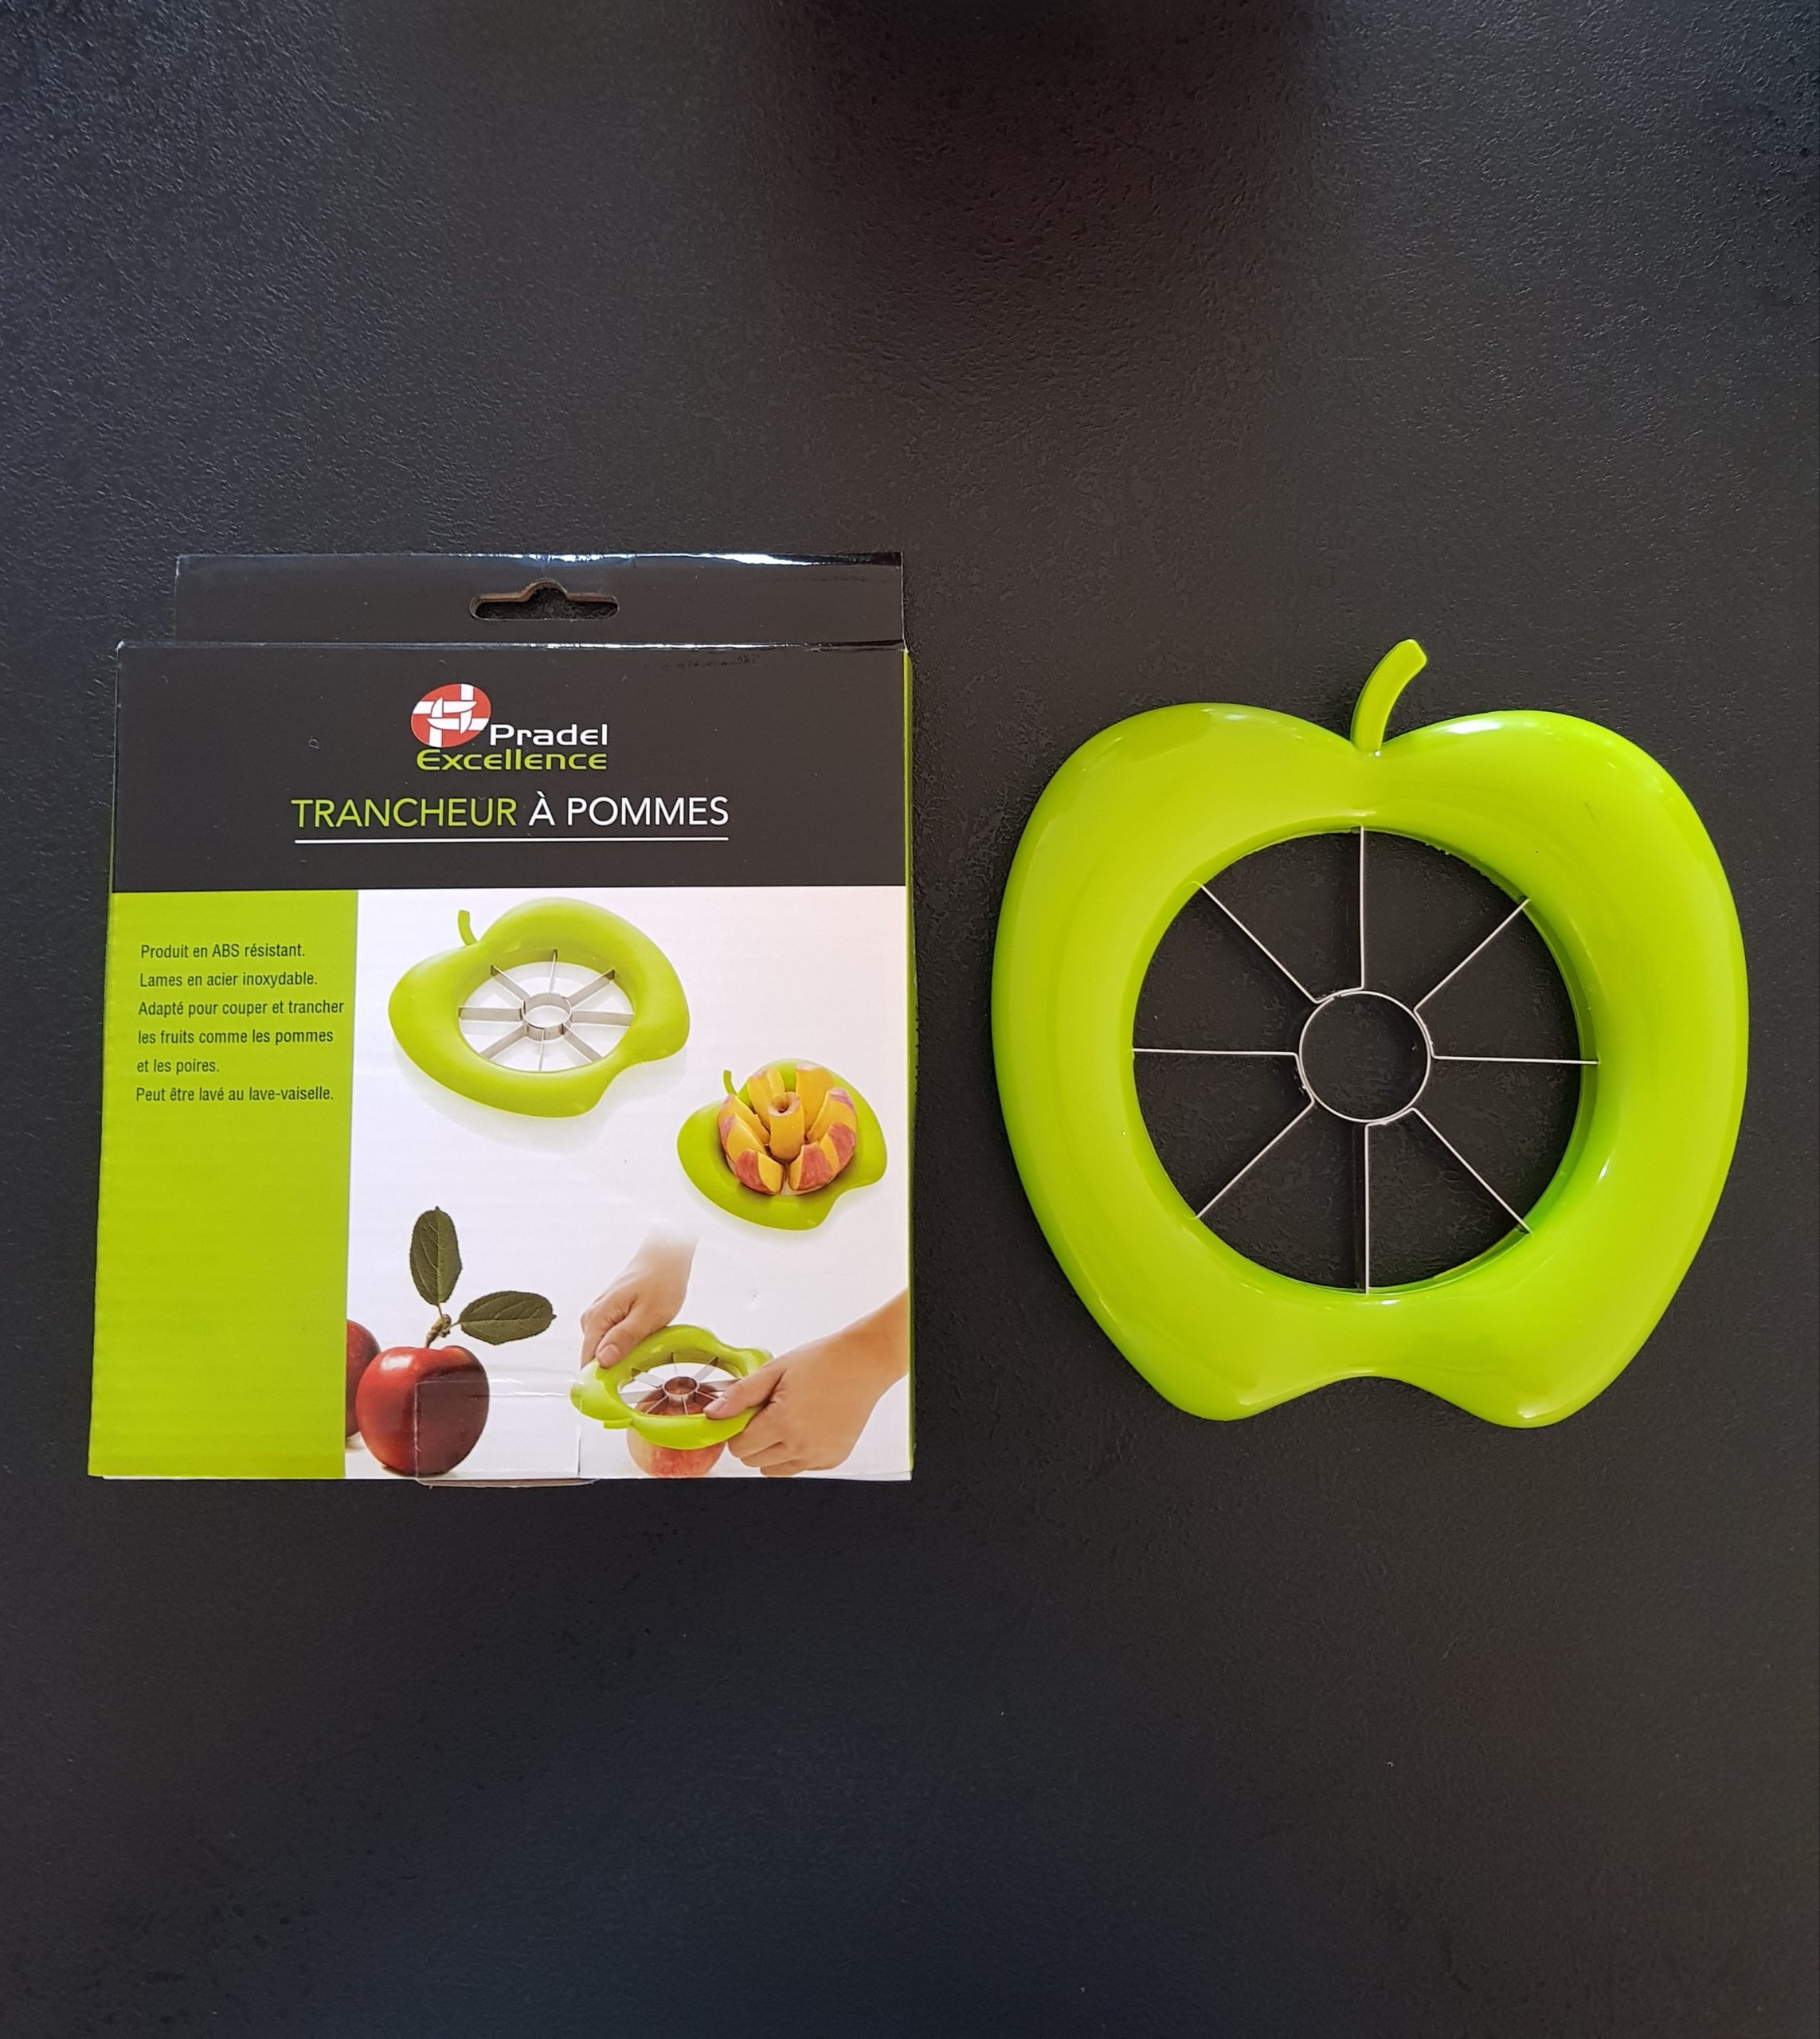 TRANCHEUR A POMME PRADEL EXCELLENCE – MaxUstensiles